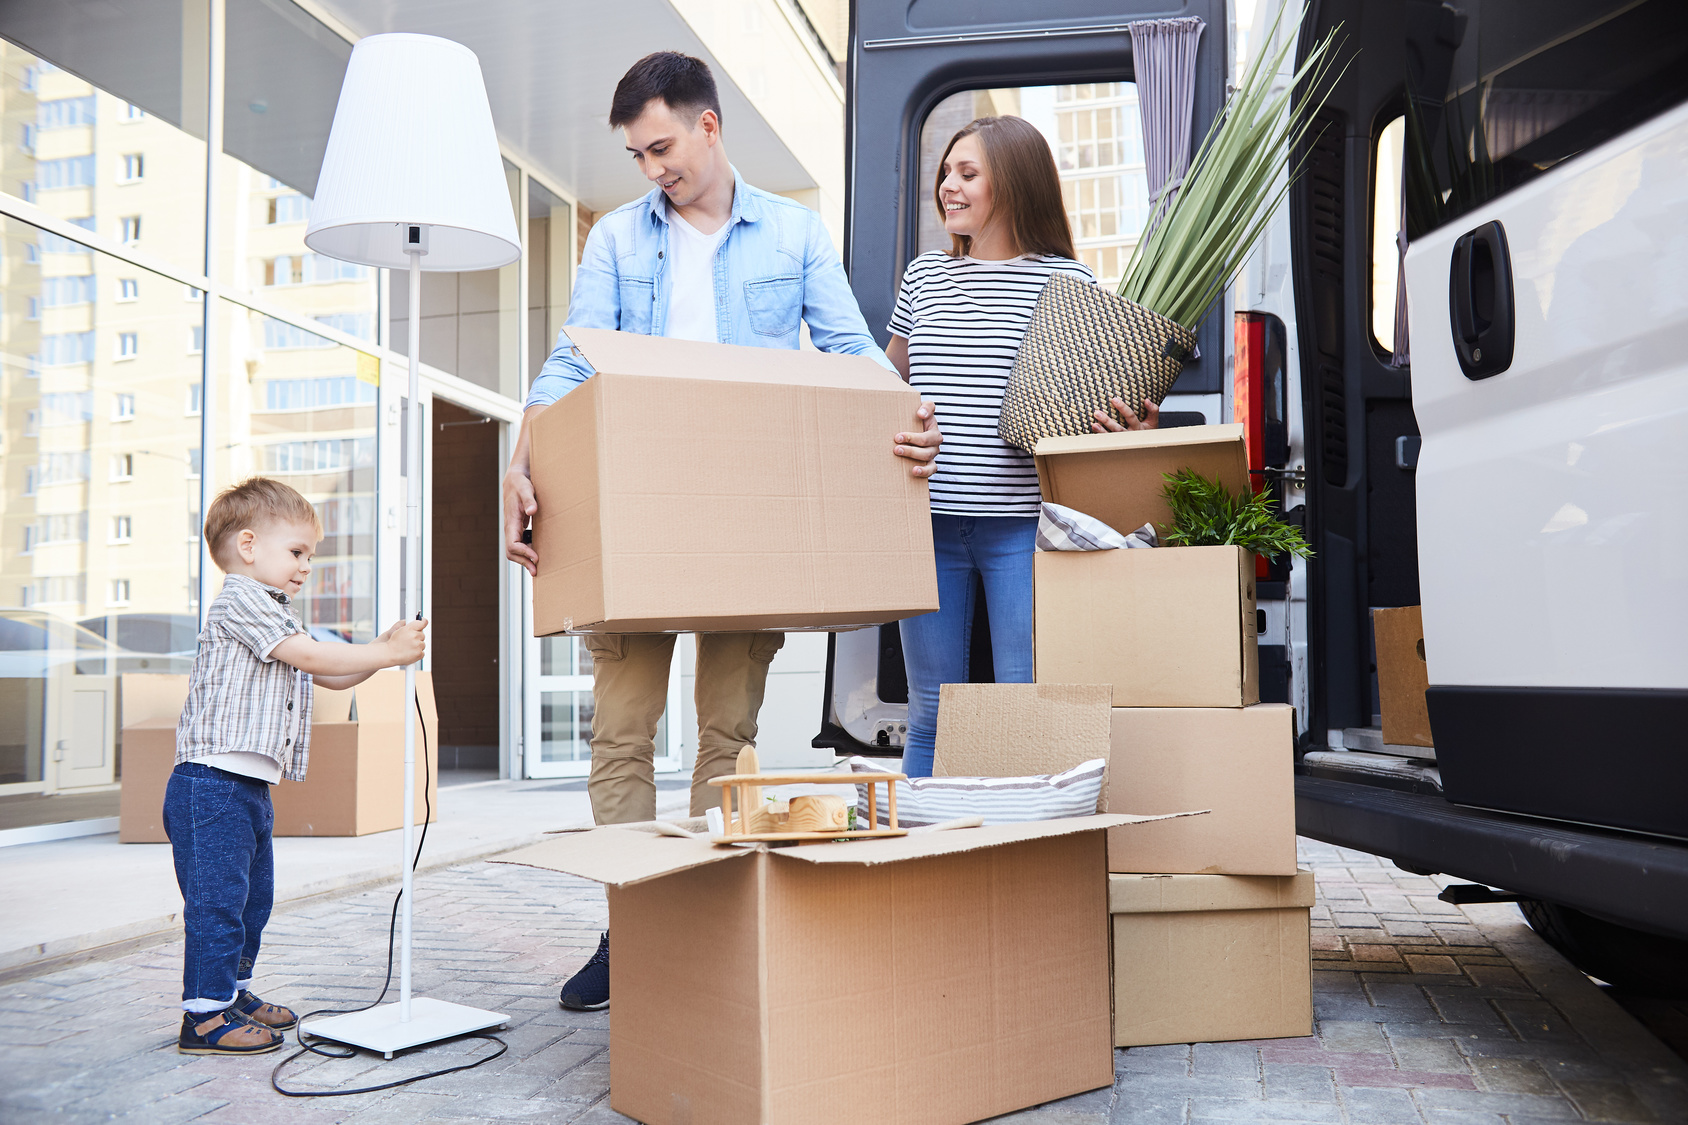 How Can People Look for the Best Movers in Calgary?